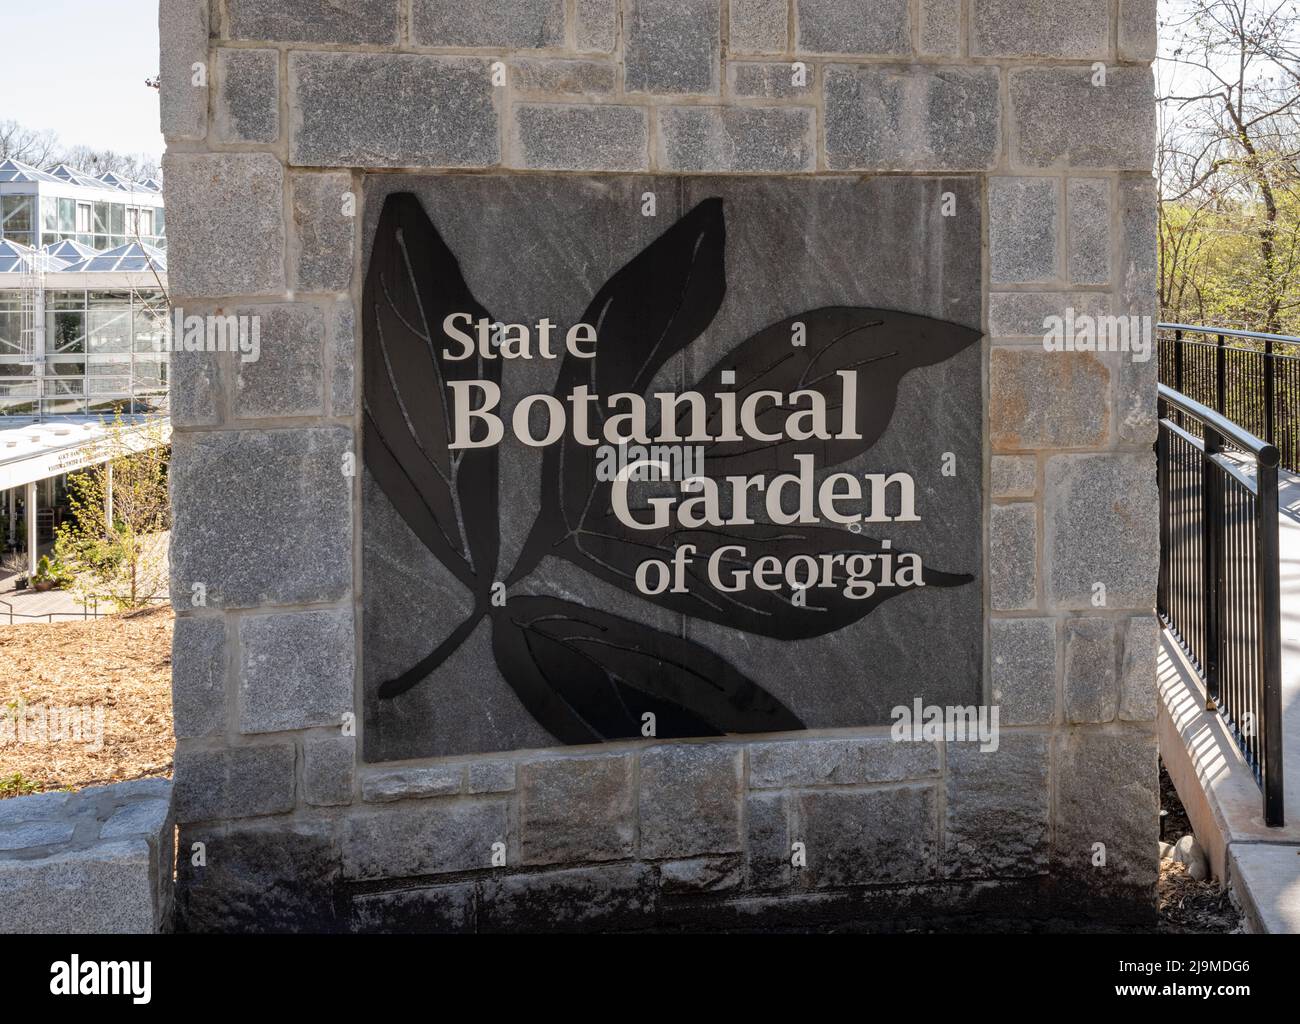 Athens, GA, United States: March 27, 2020: Sign At The State Botanical Garden Of Georgia located in Athens, Georgia Stock Photo